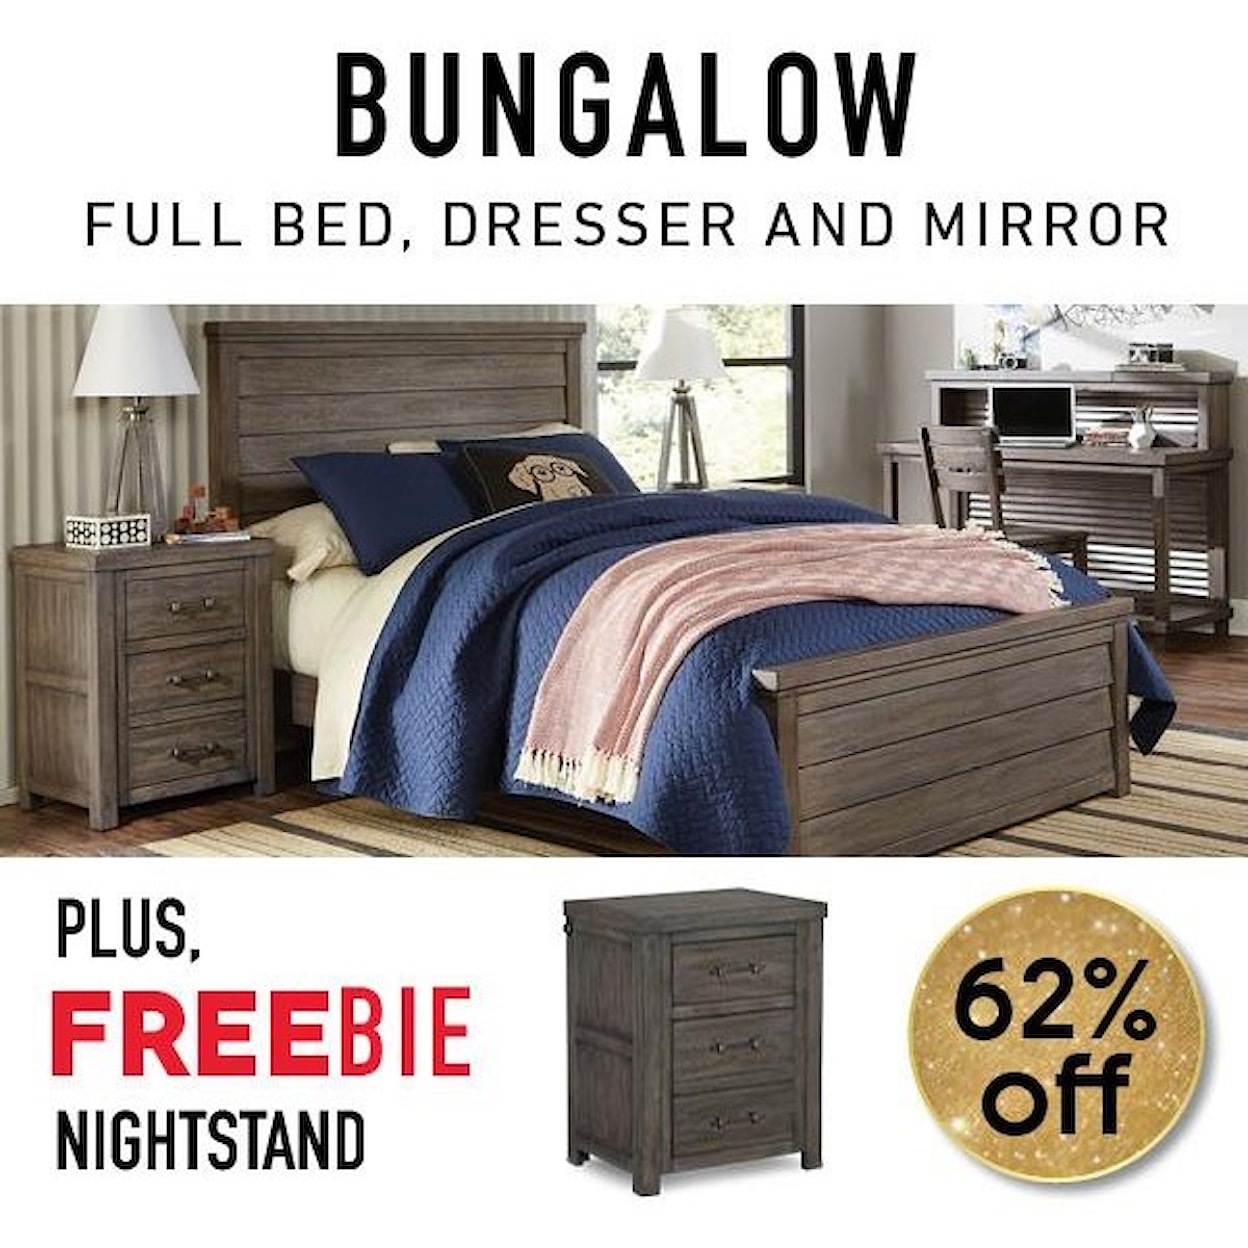 Legacy Classic Kids Bungalow Bungalow Full Bedroom Group with FREEBIE!